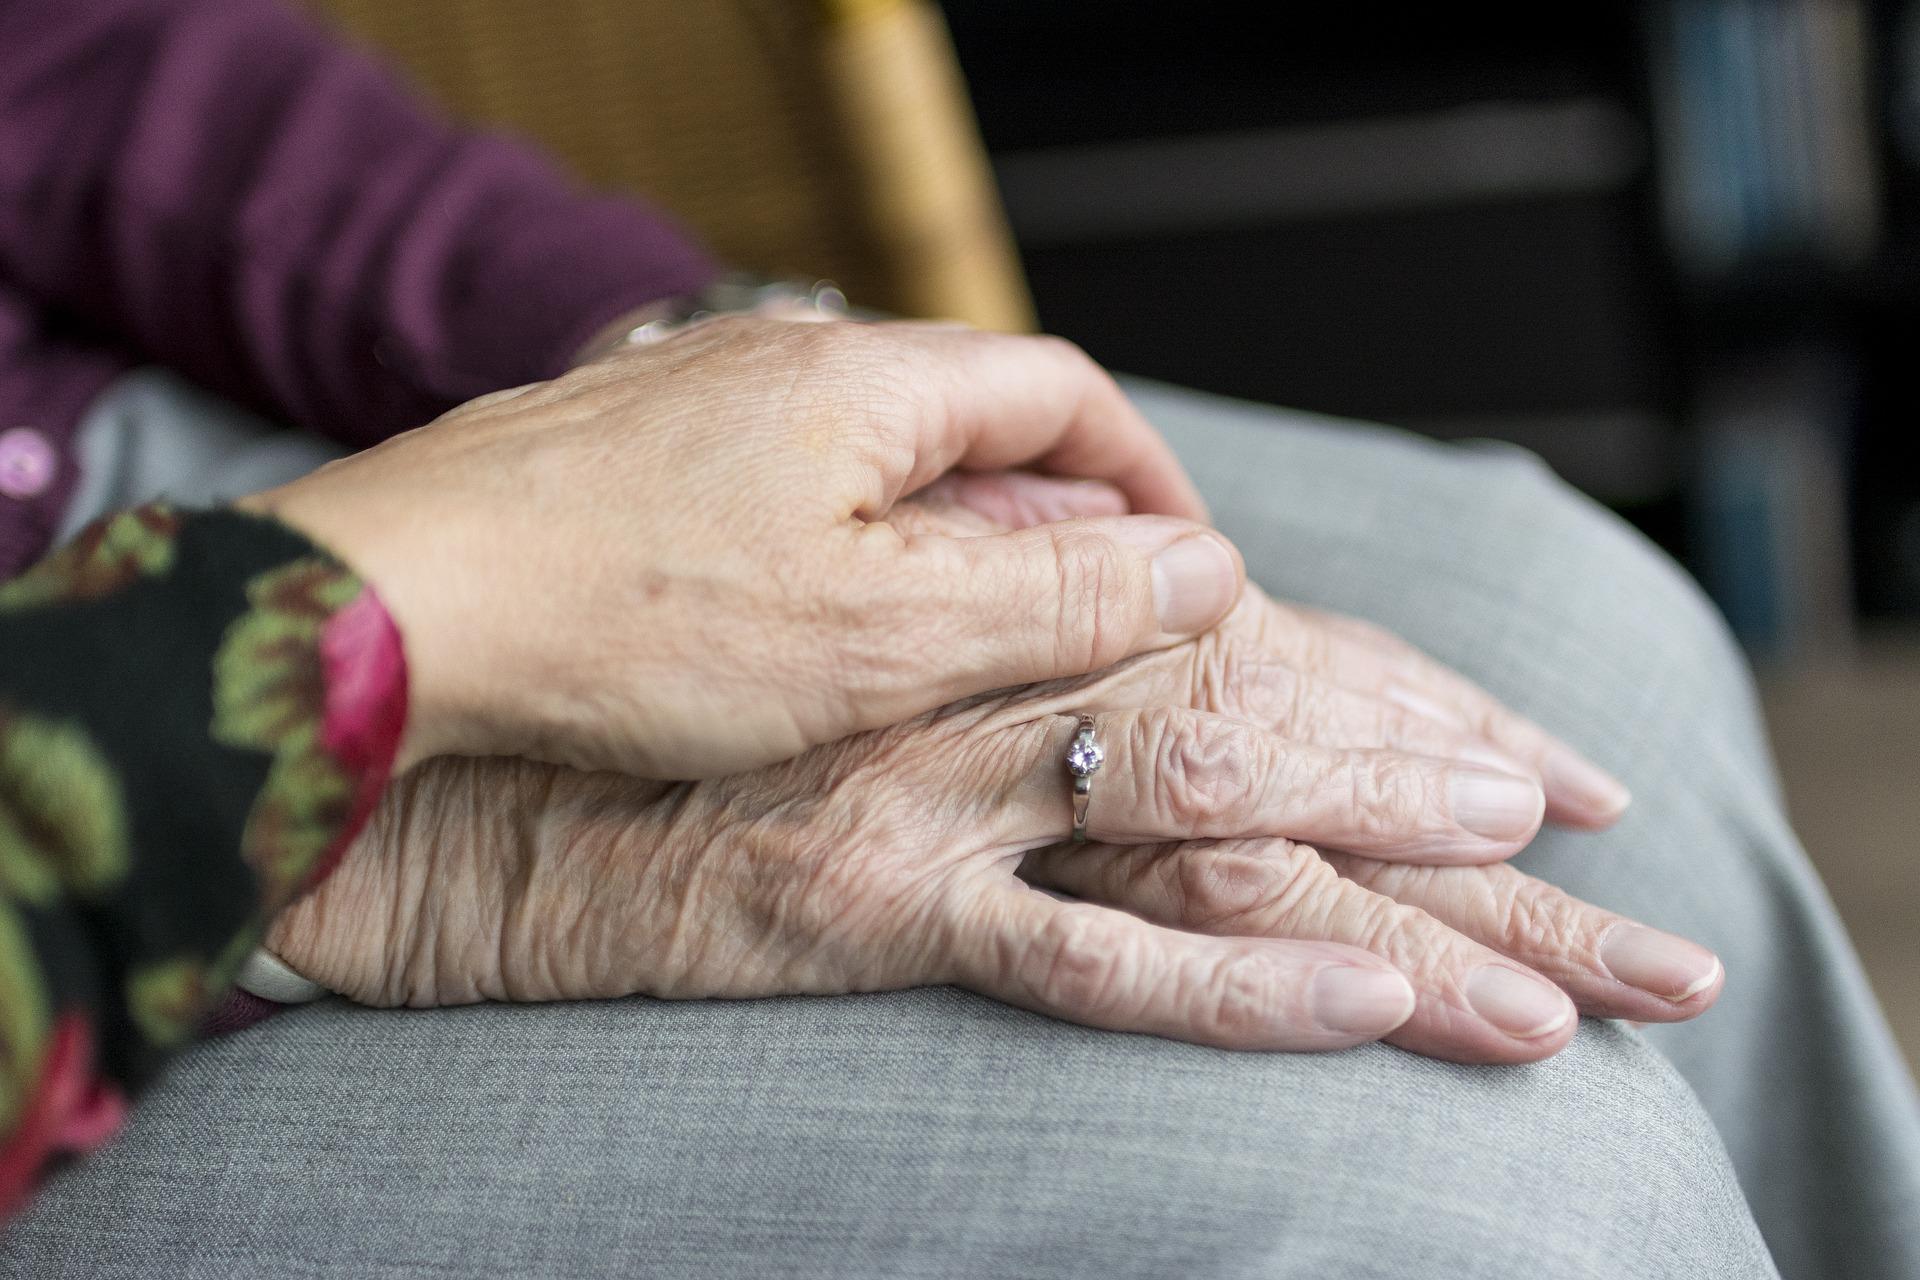 Move to bring conversations on death and end of life care 'out into the open'